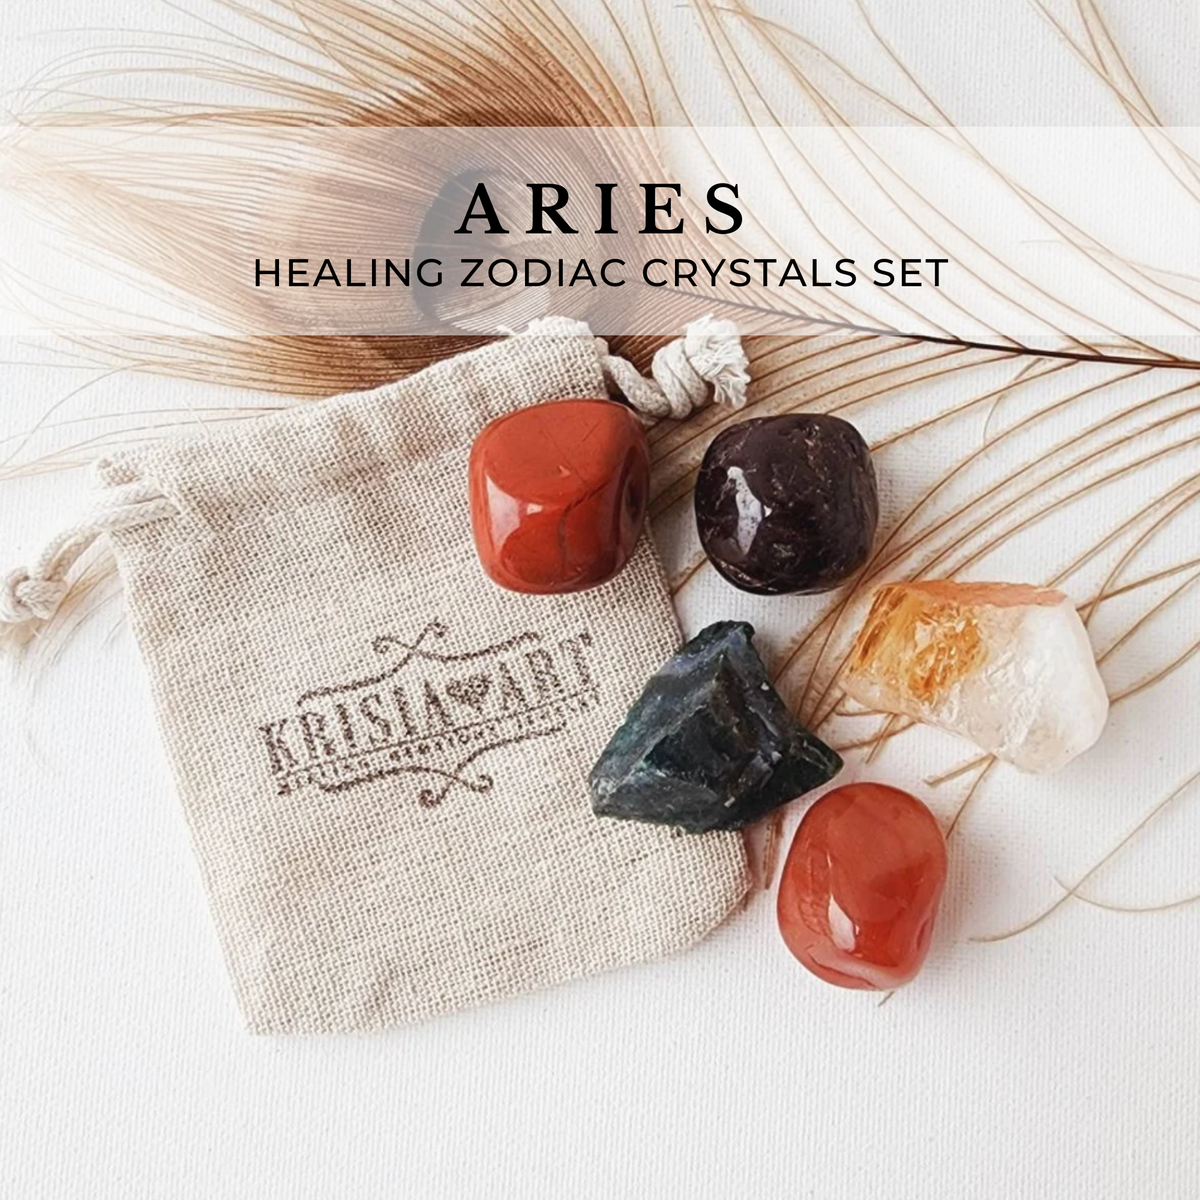 Zodiac sign ARIES crystal set - March 21 - April 19 - horoscope astrology healing crystals - Red Garnet, Citrine, Carnelian, Bloodstone, and Red Jasper